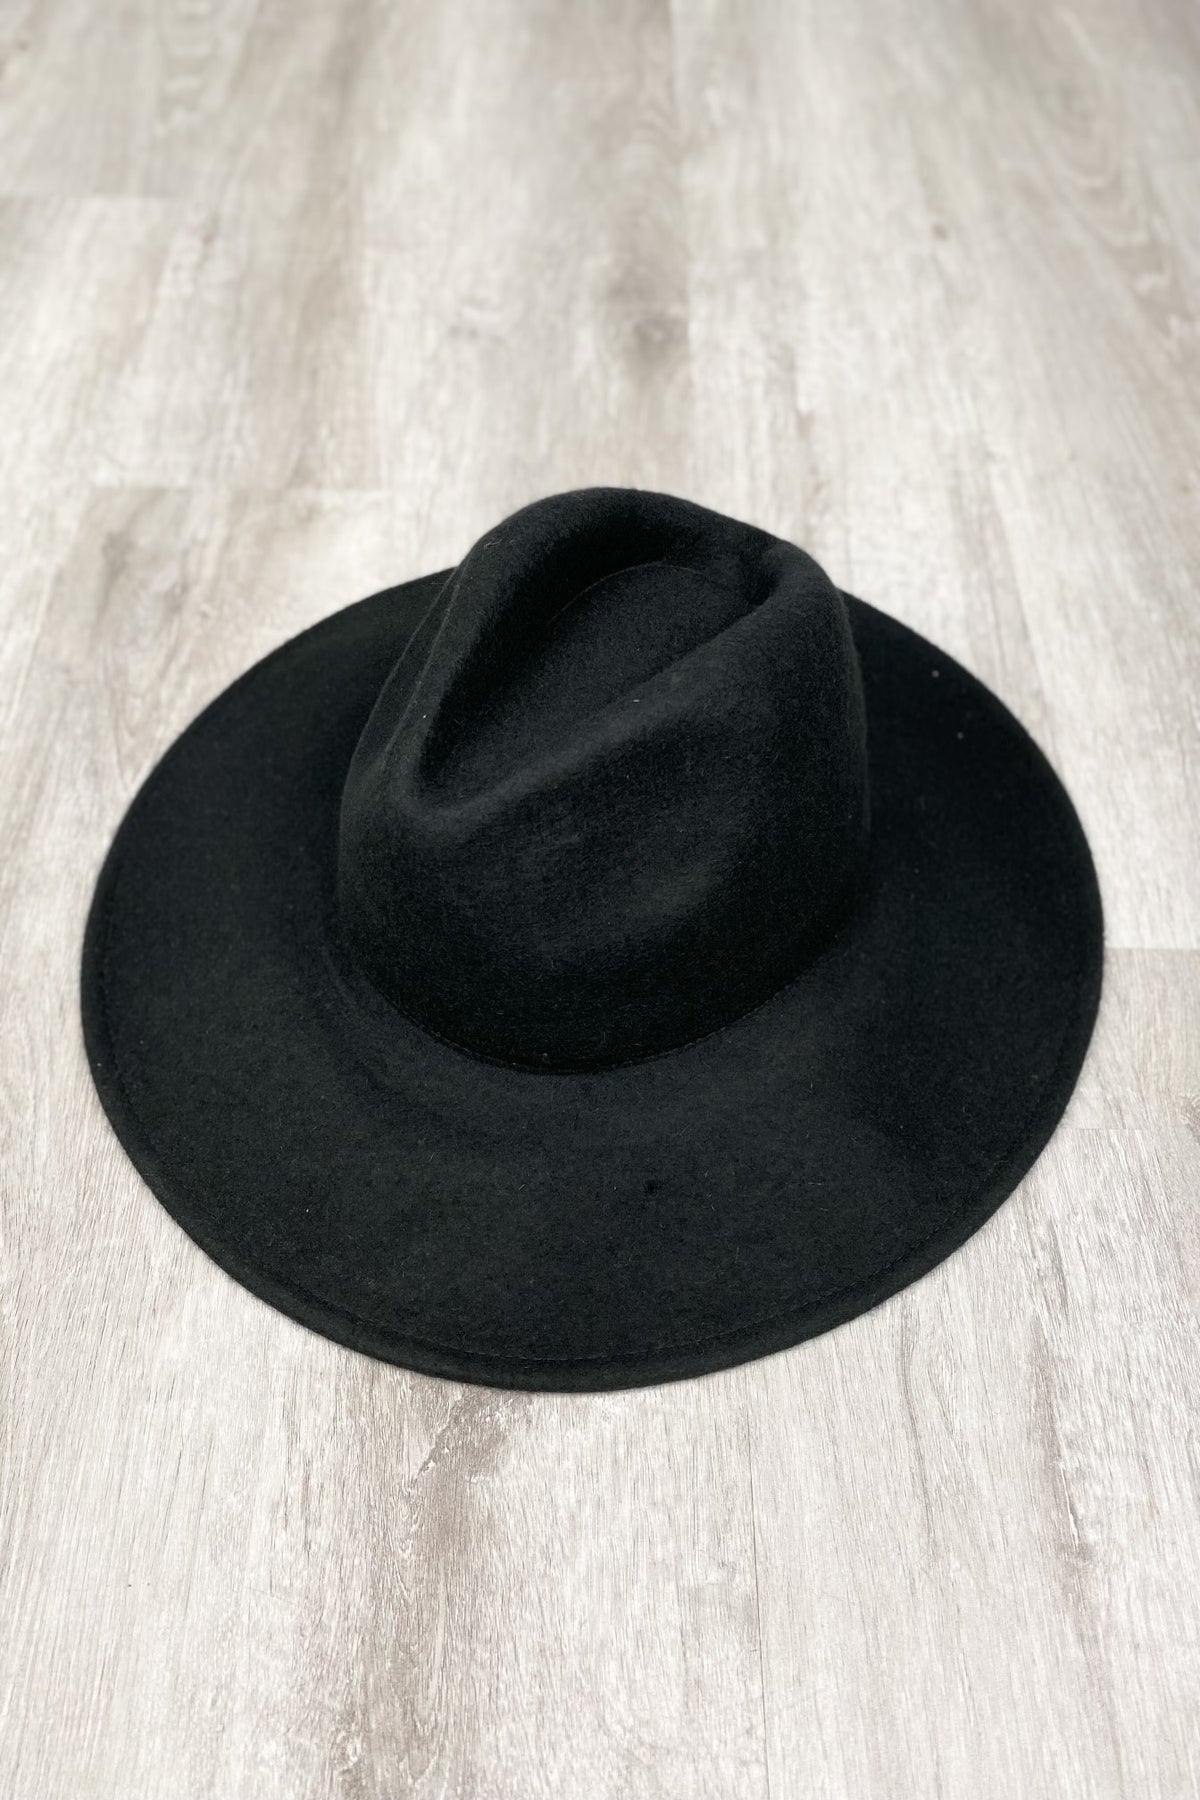 Wide brim panama hat black - Trendy Hats at Lush Fashion Lounge Boutique in Oklahoma City